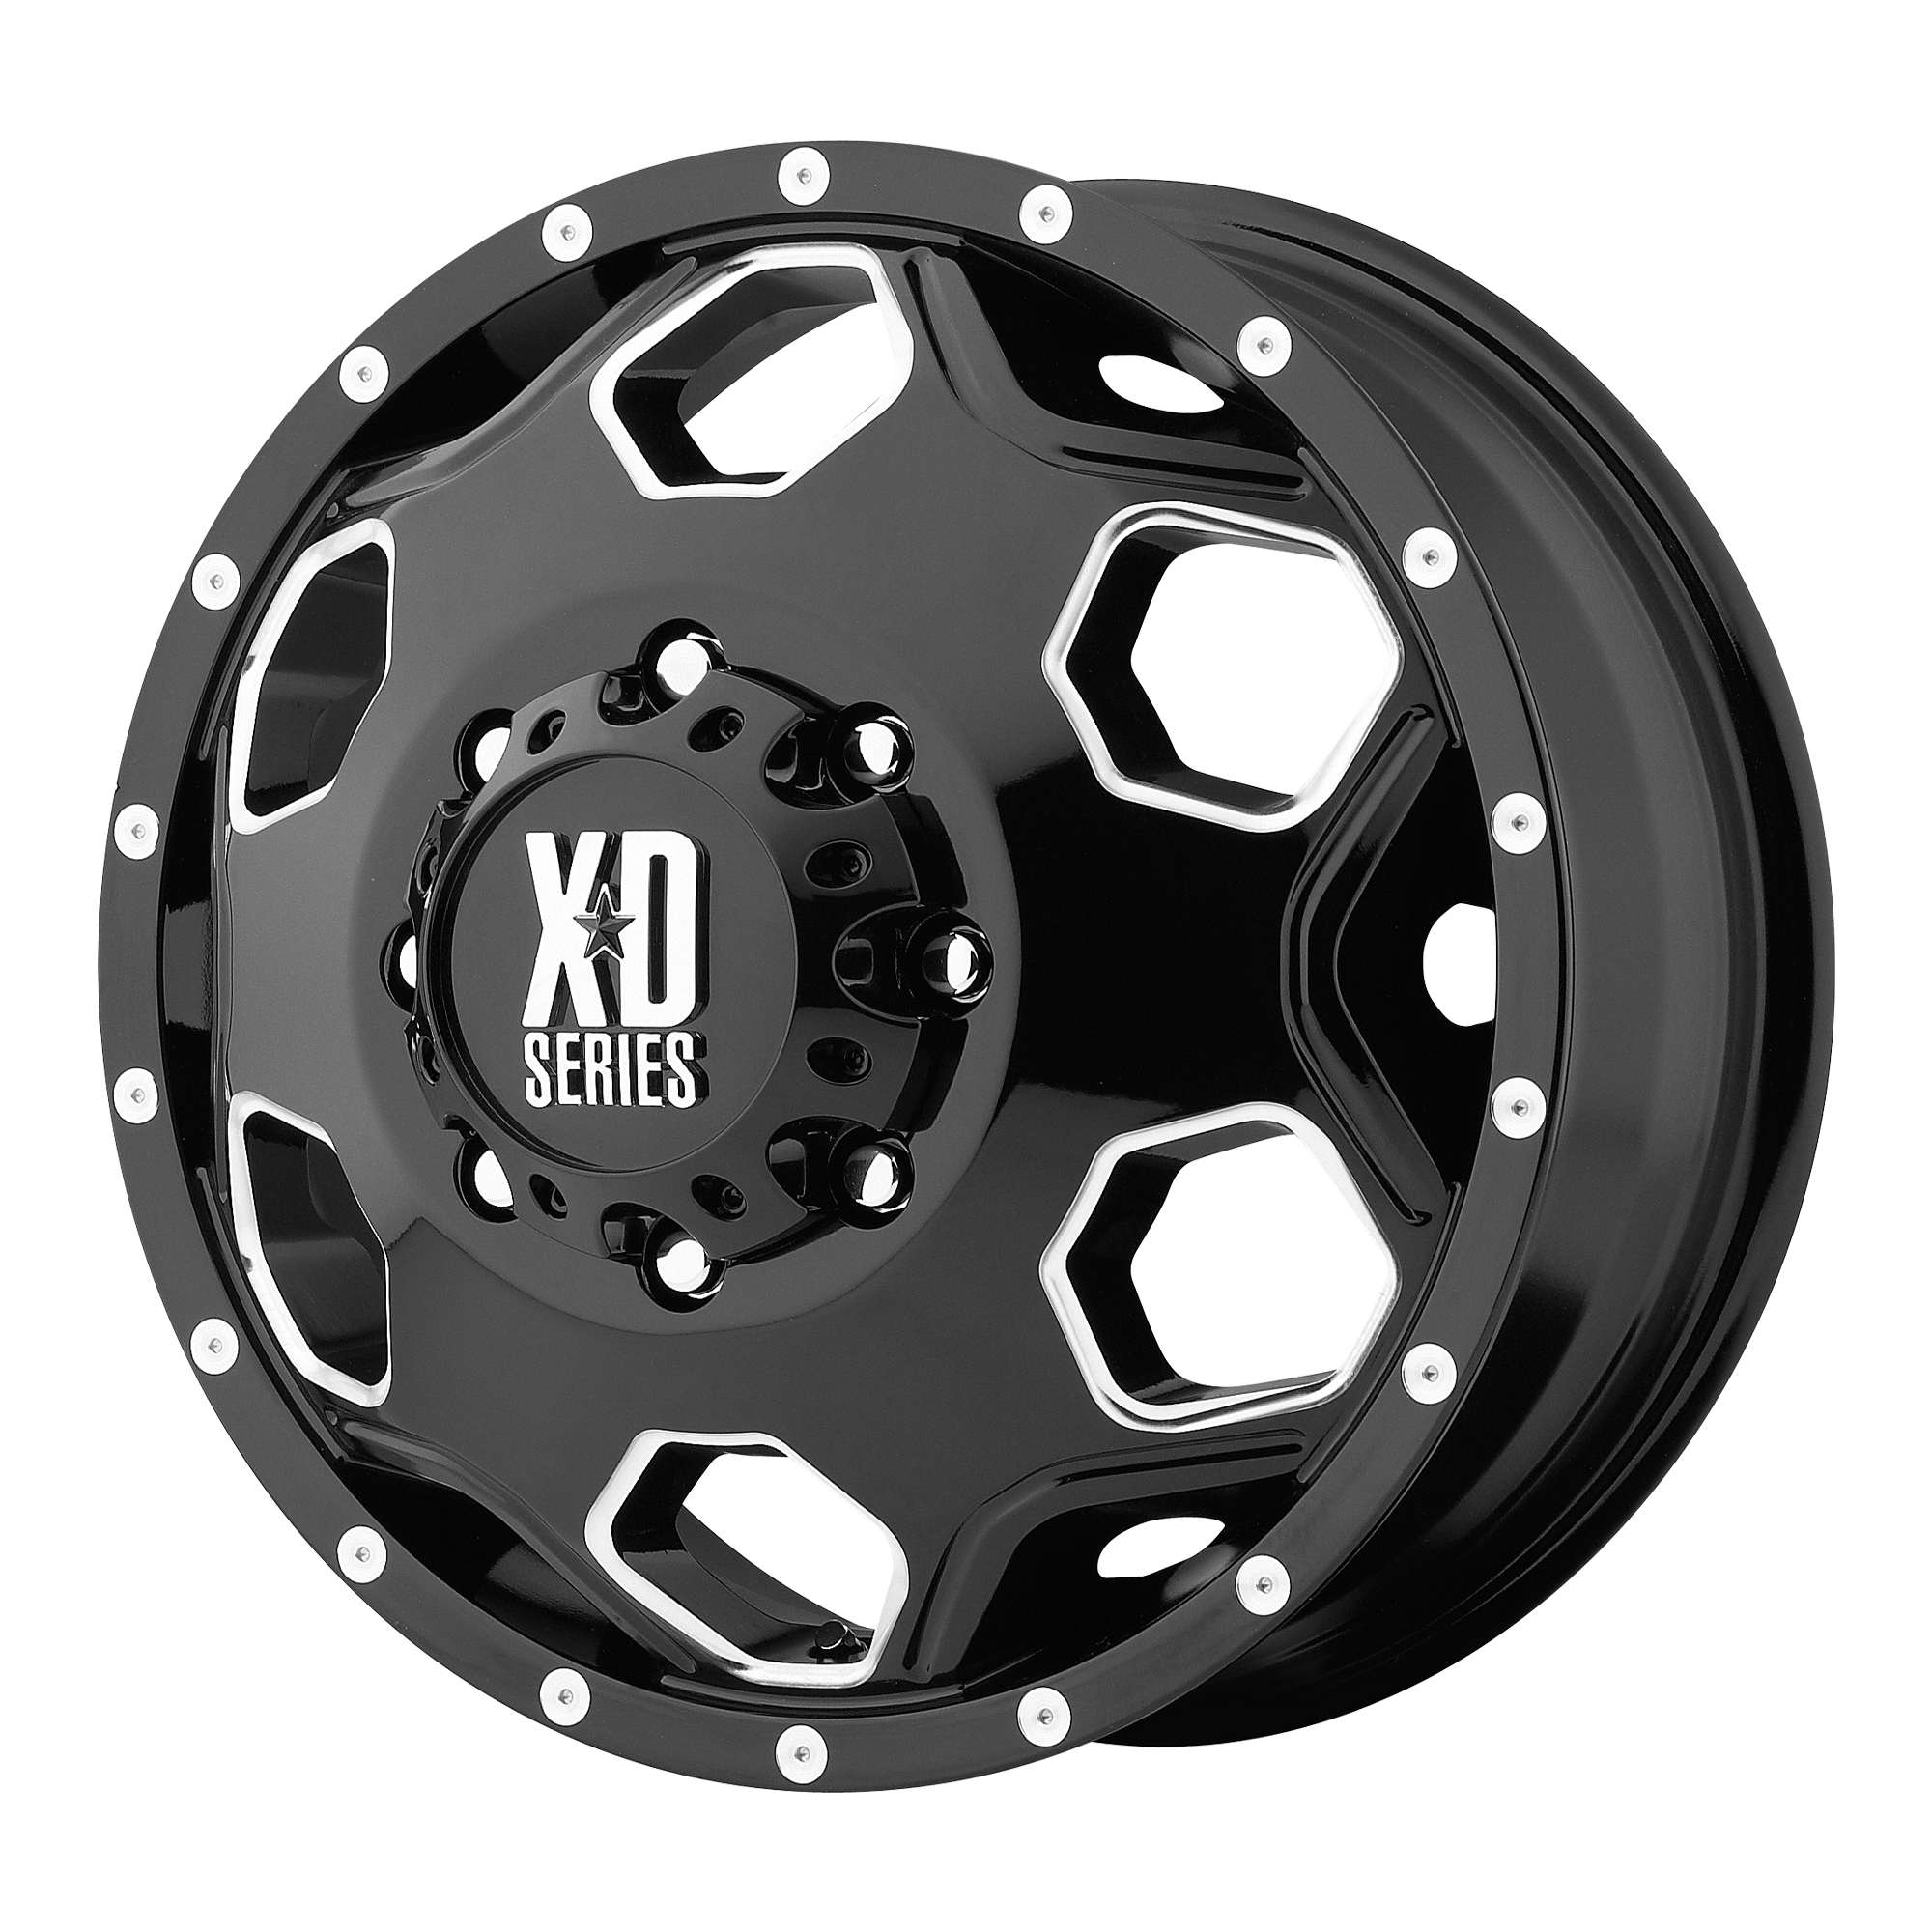 XD XD815 BATALLION GLOSS BLACK WITH MILLED ACCENTS WHEELS | 22X8.25 | 8X165.1 | OFFSET: -265MM | CB: 117MM